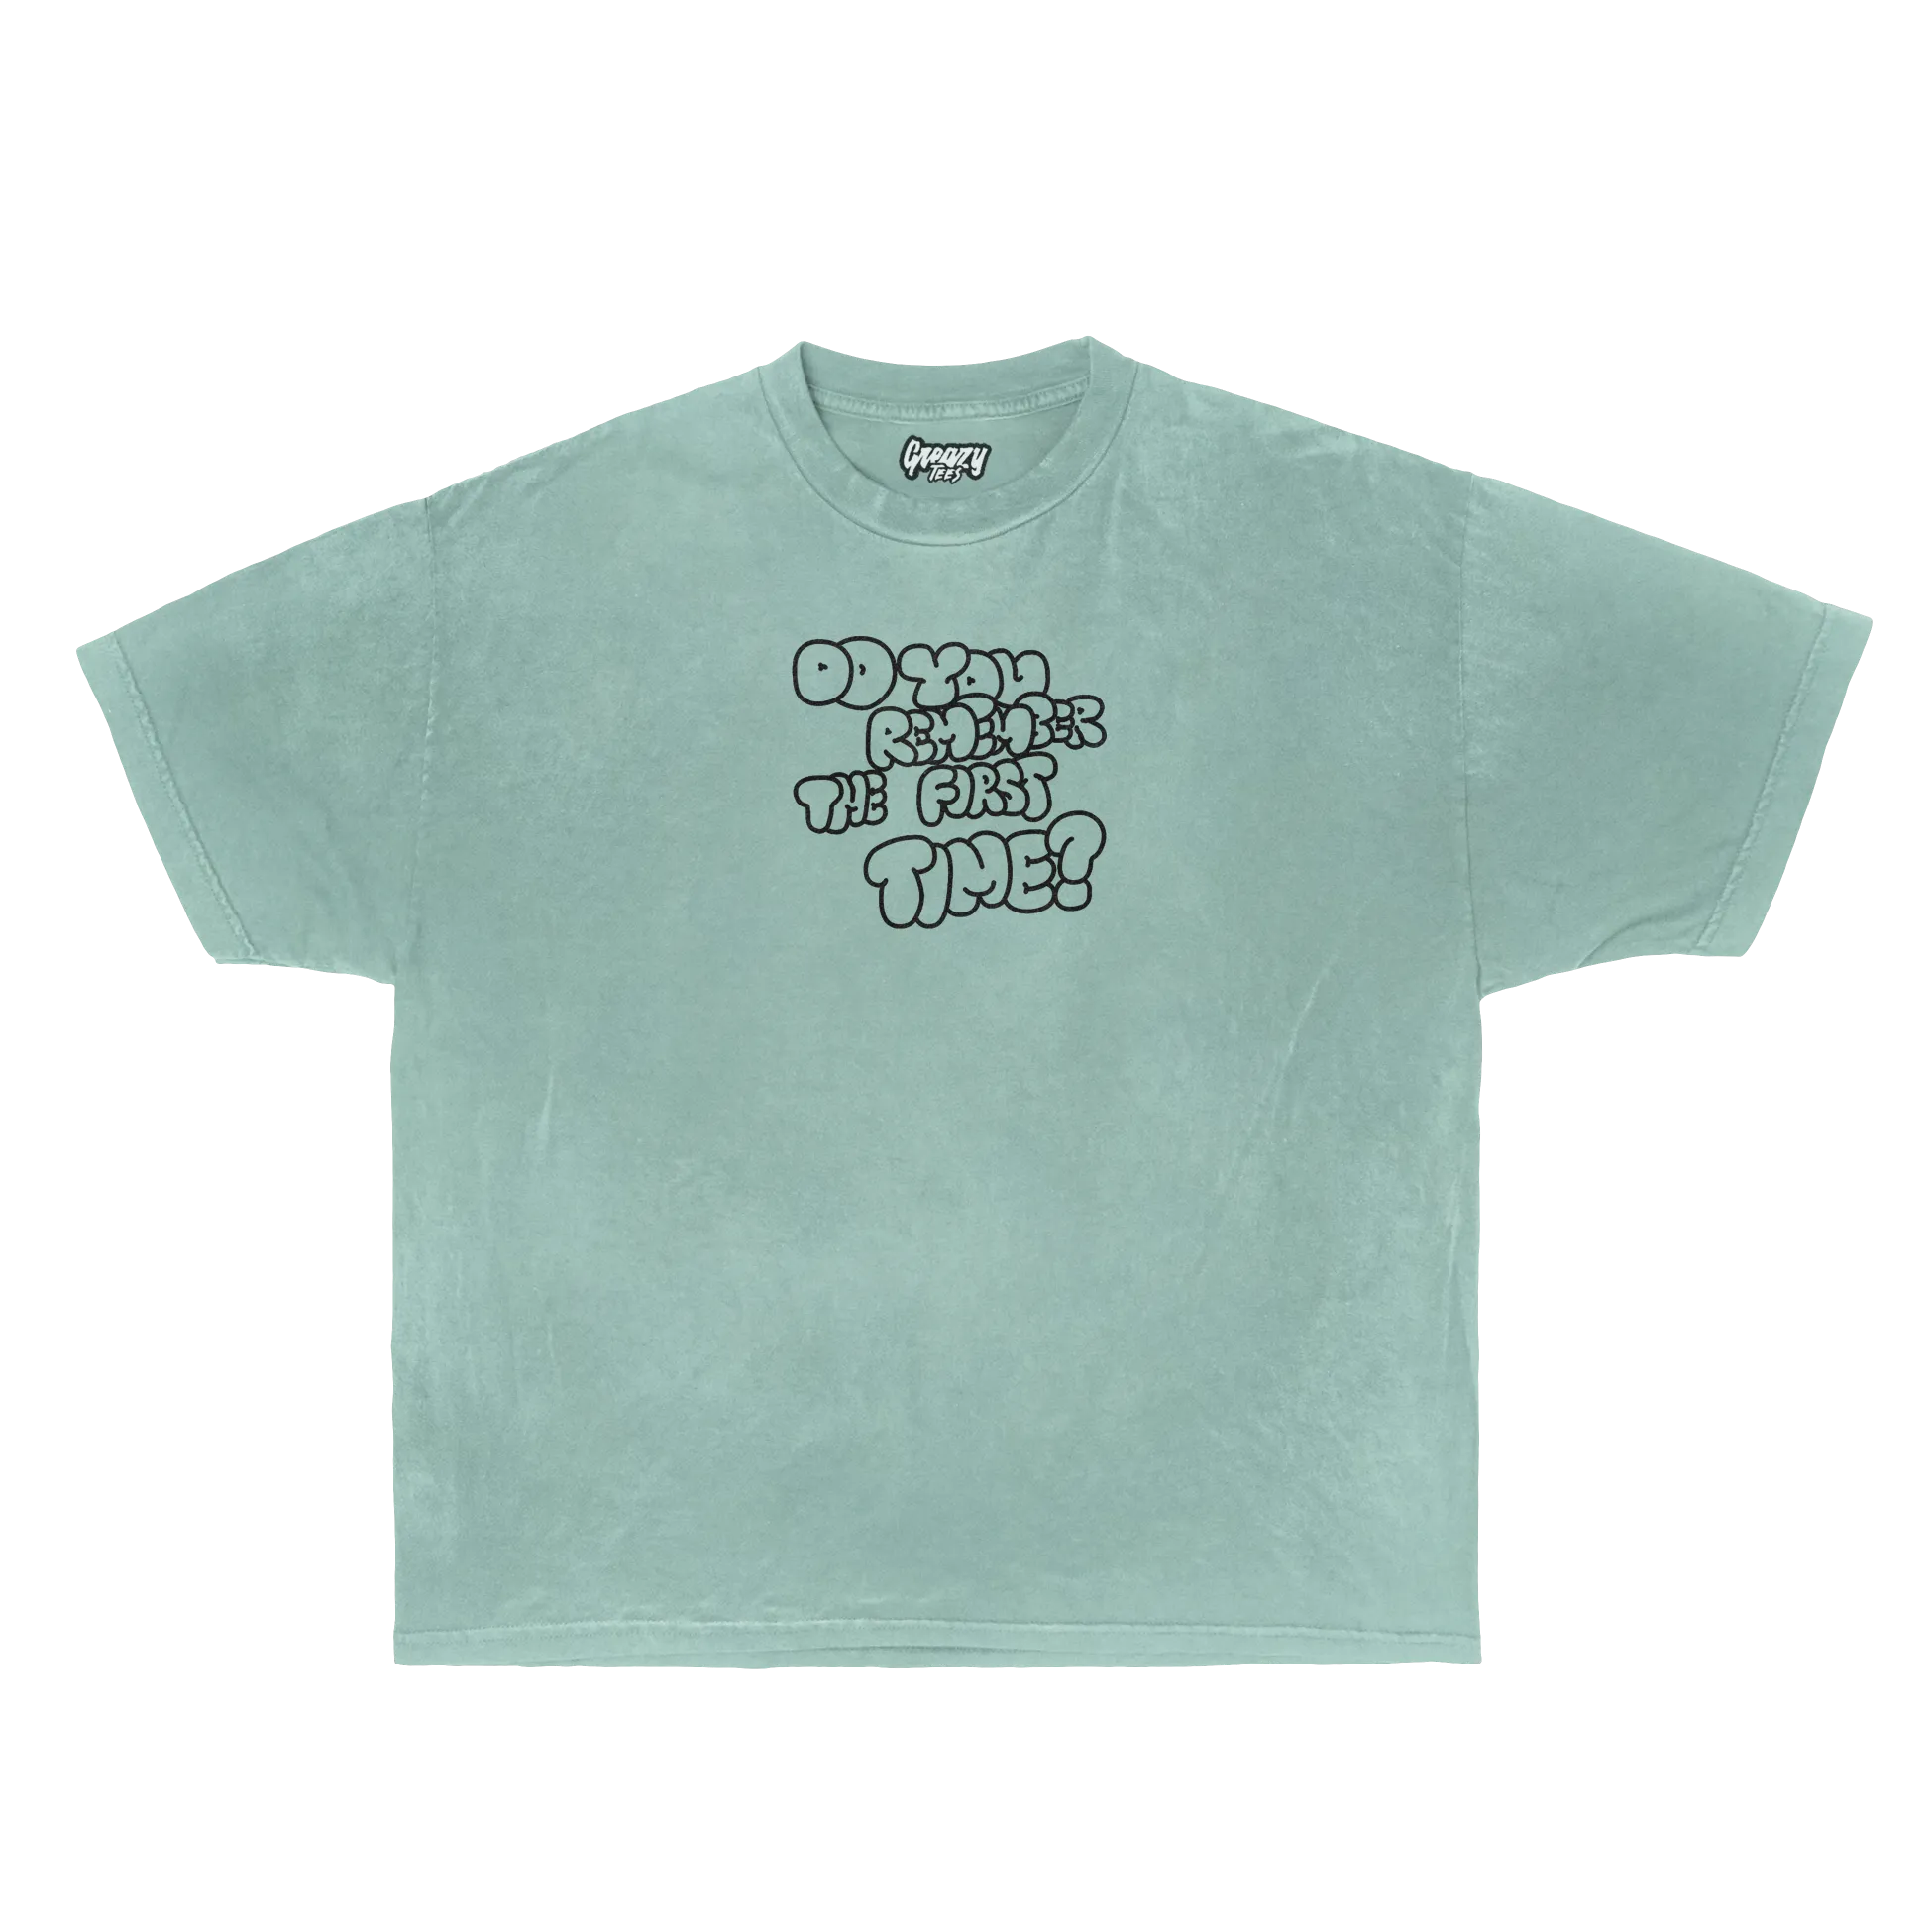 First Time Tee Tee Greazy Tees XS Mint Green Oversized